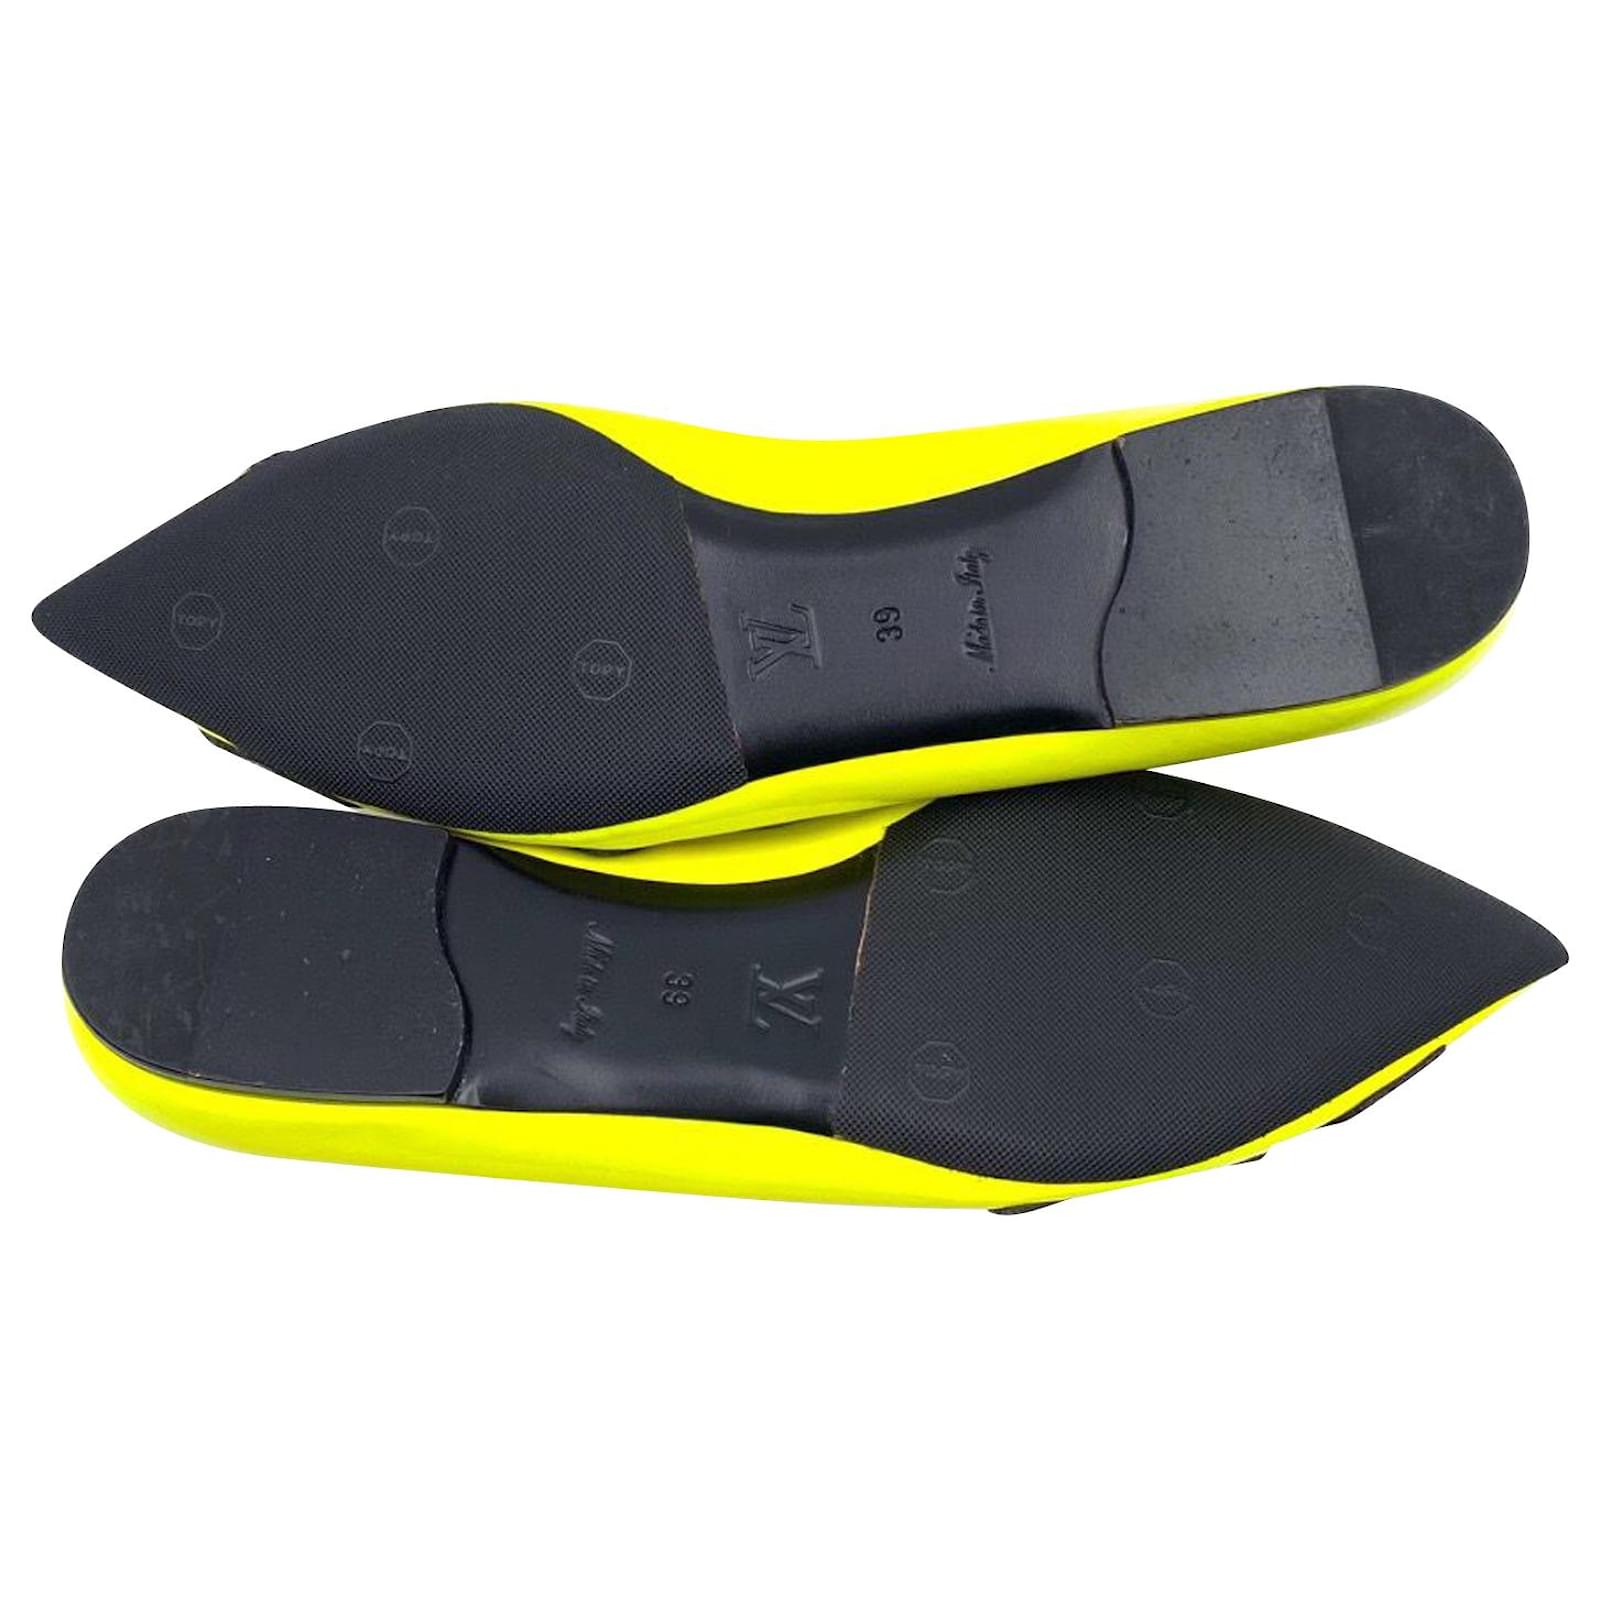 Louis Vuitton x Stephen Sprouse ballerinas in yellow patent